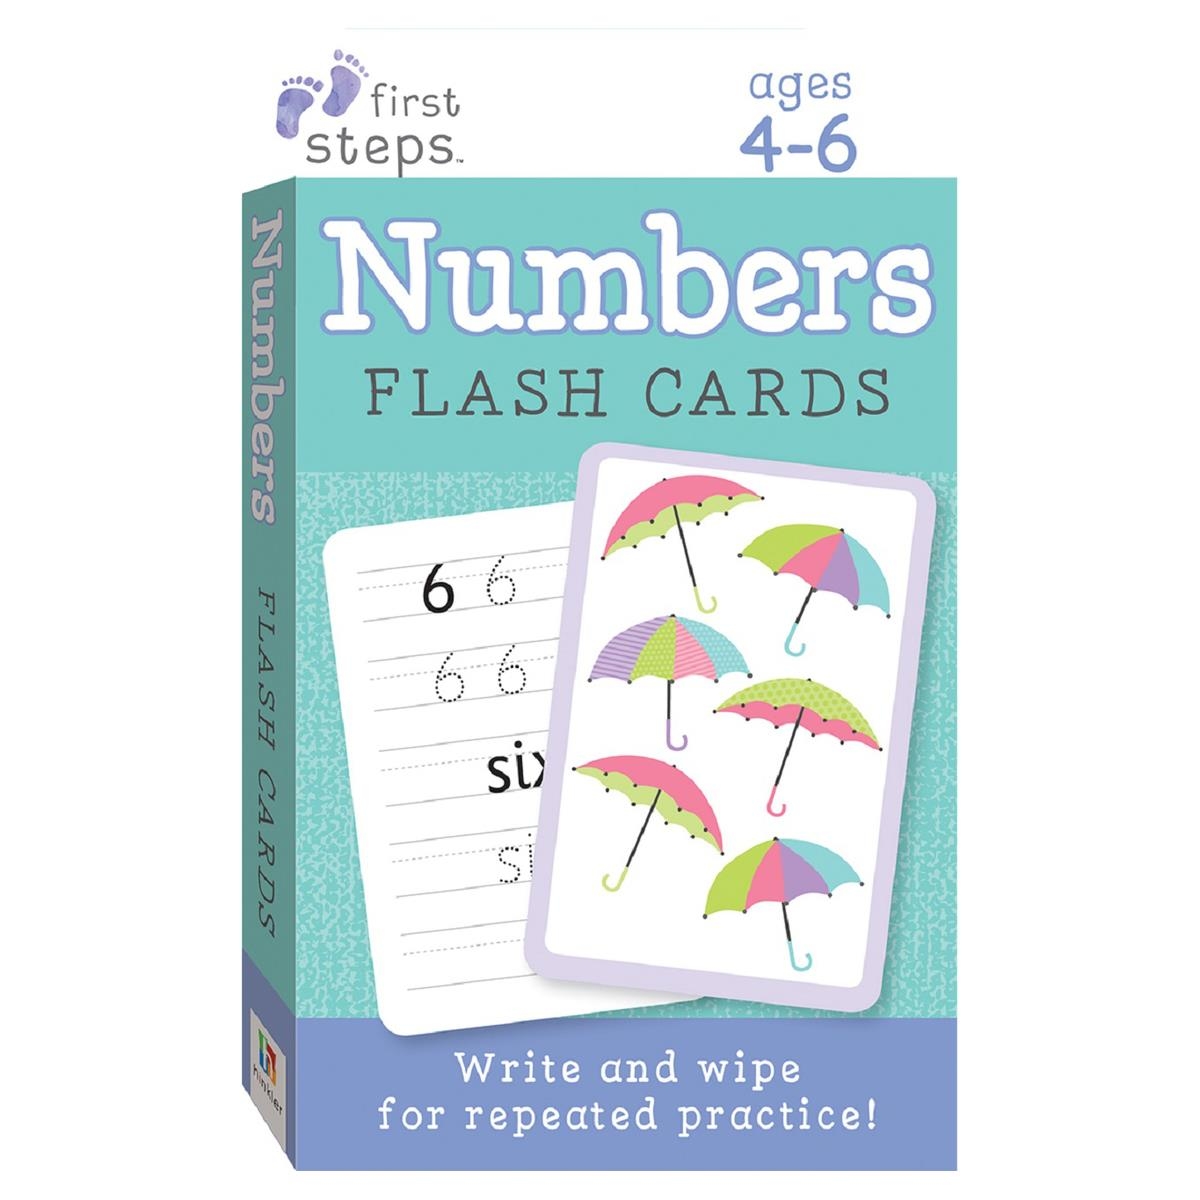 First Steps Flash Cards: Numbers